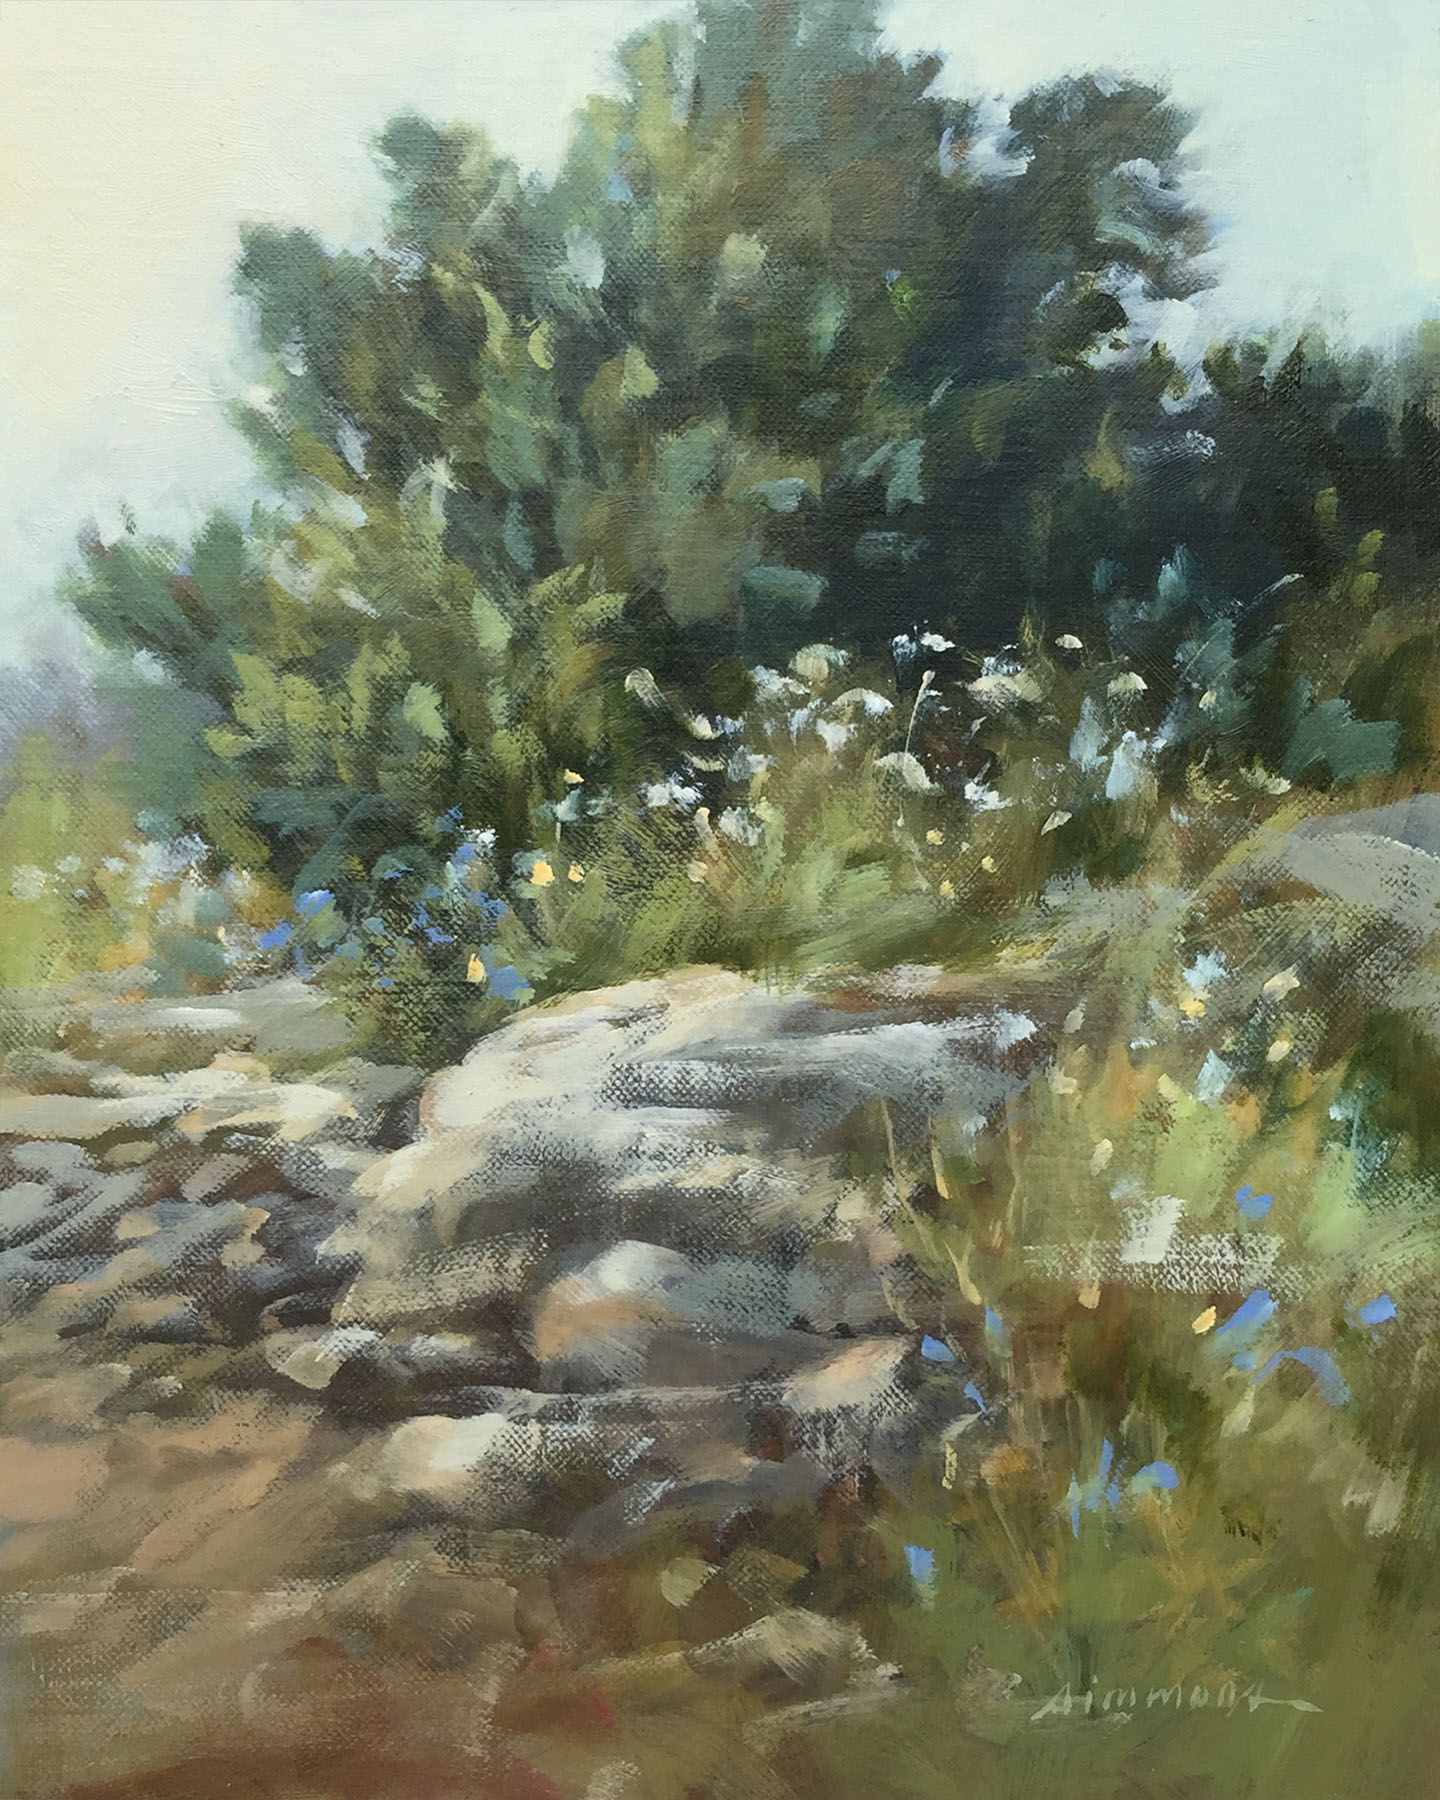 Katherine Simmons, Painting Better Landscapes